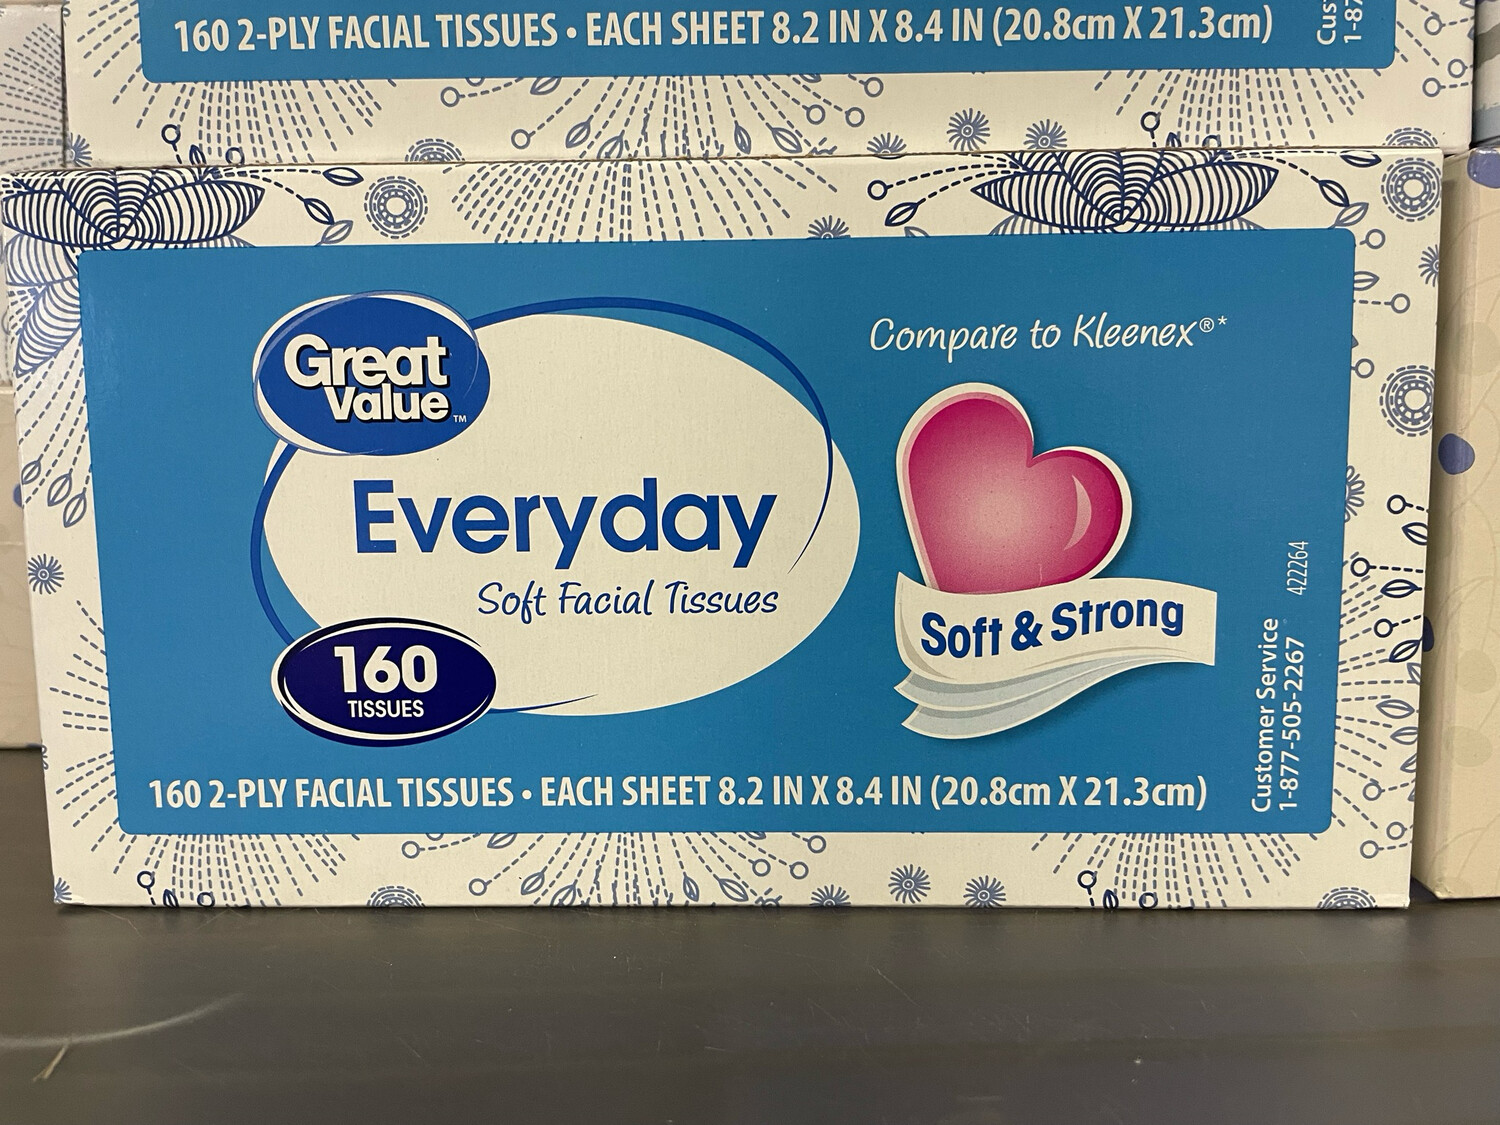 Tissues
(*LIMIT 2 per household*)